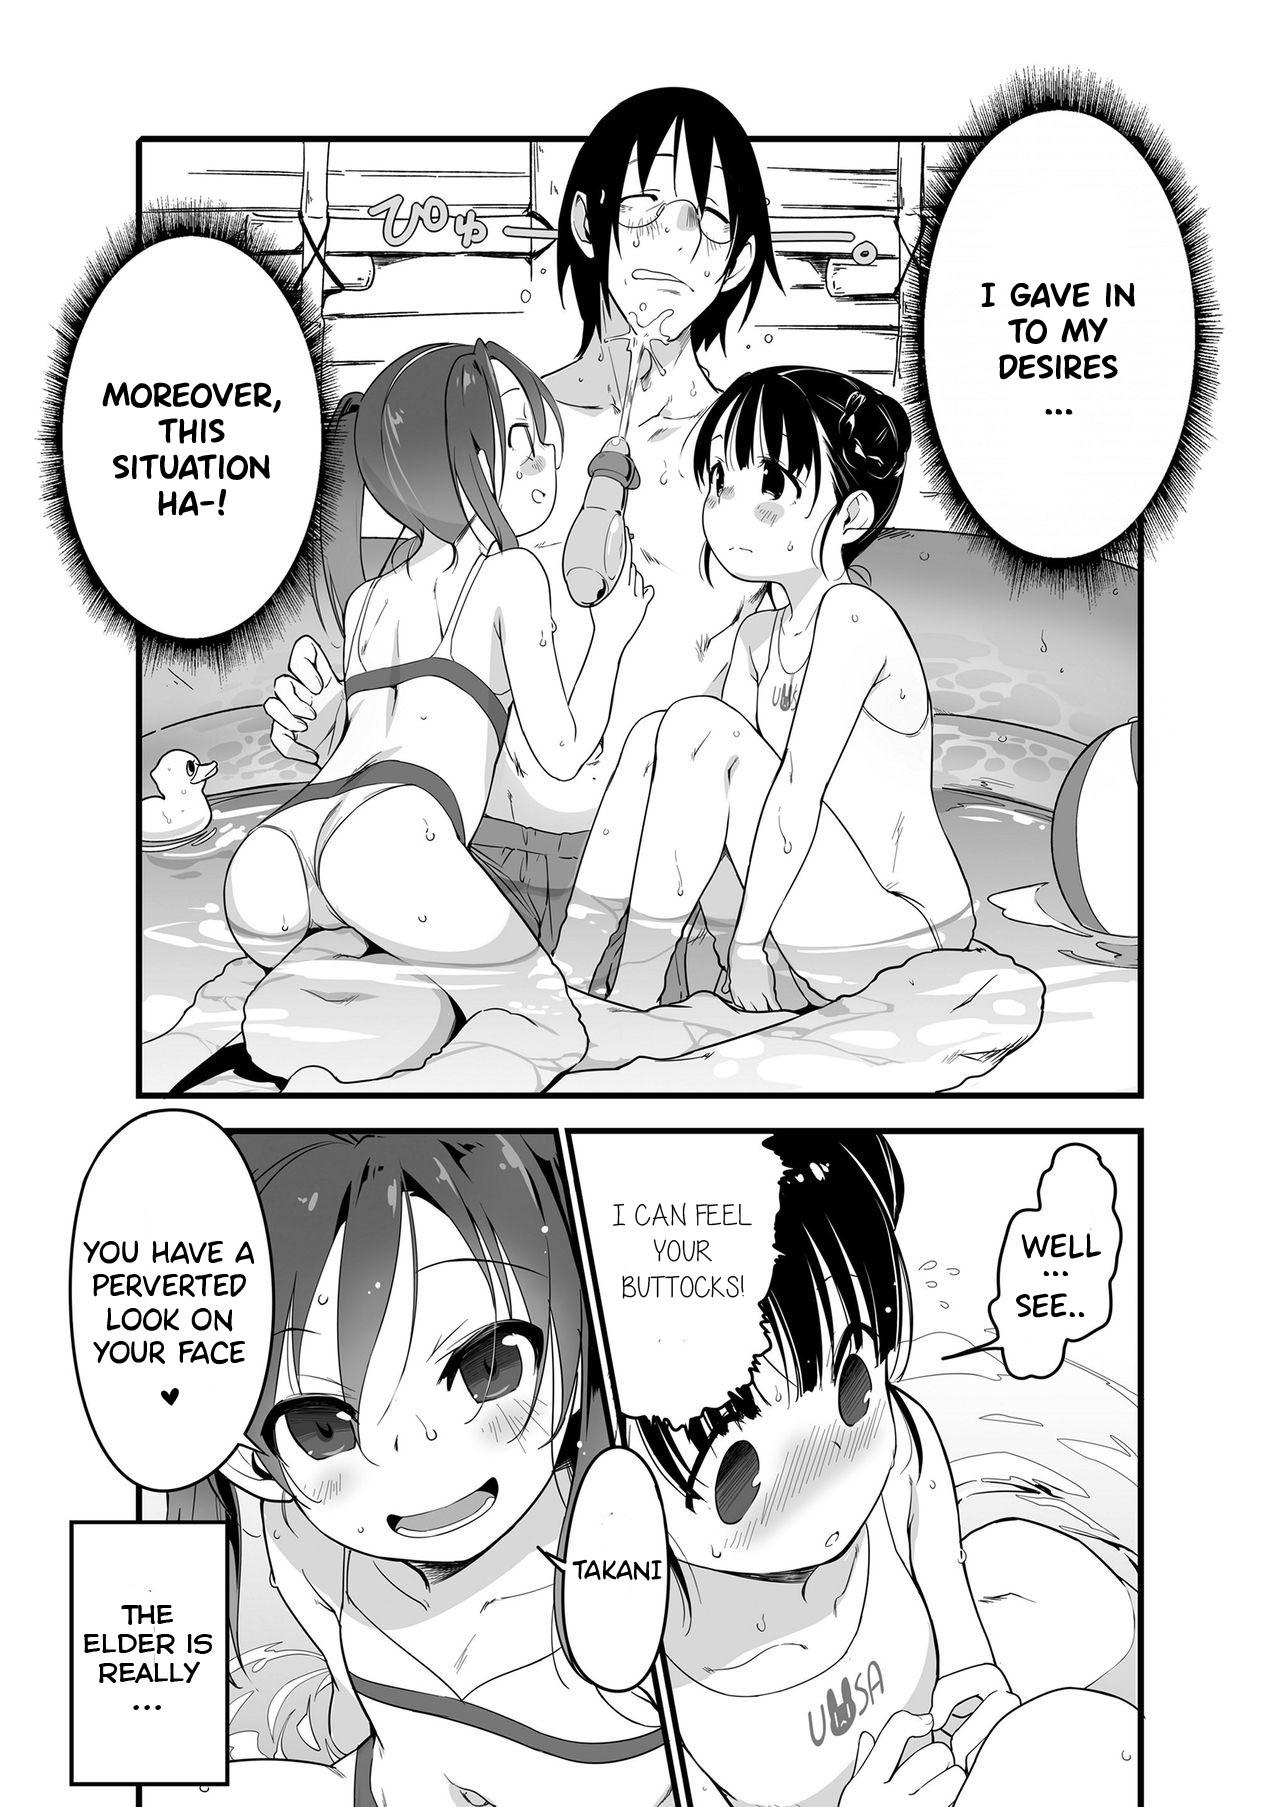 Gayporn Uchiage Hanabi, Ane to Miruka? Imouto to Miruka? | Fireworks, Should we see it with the elder sister or the younger sister? Best Blowjob - Page 6